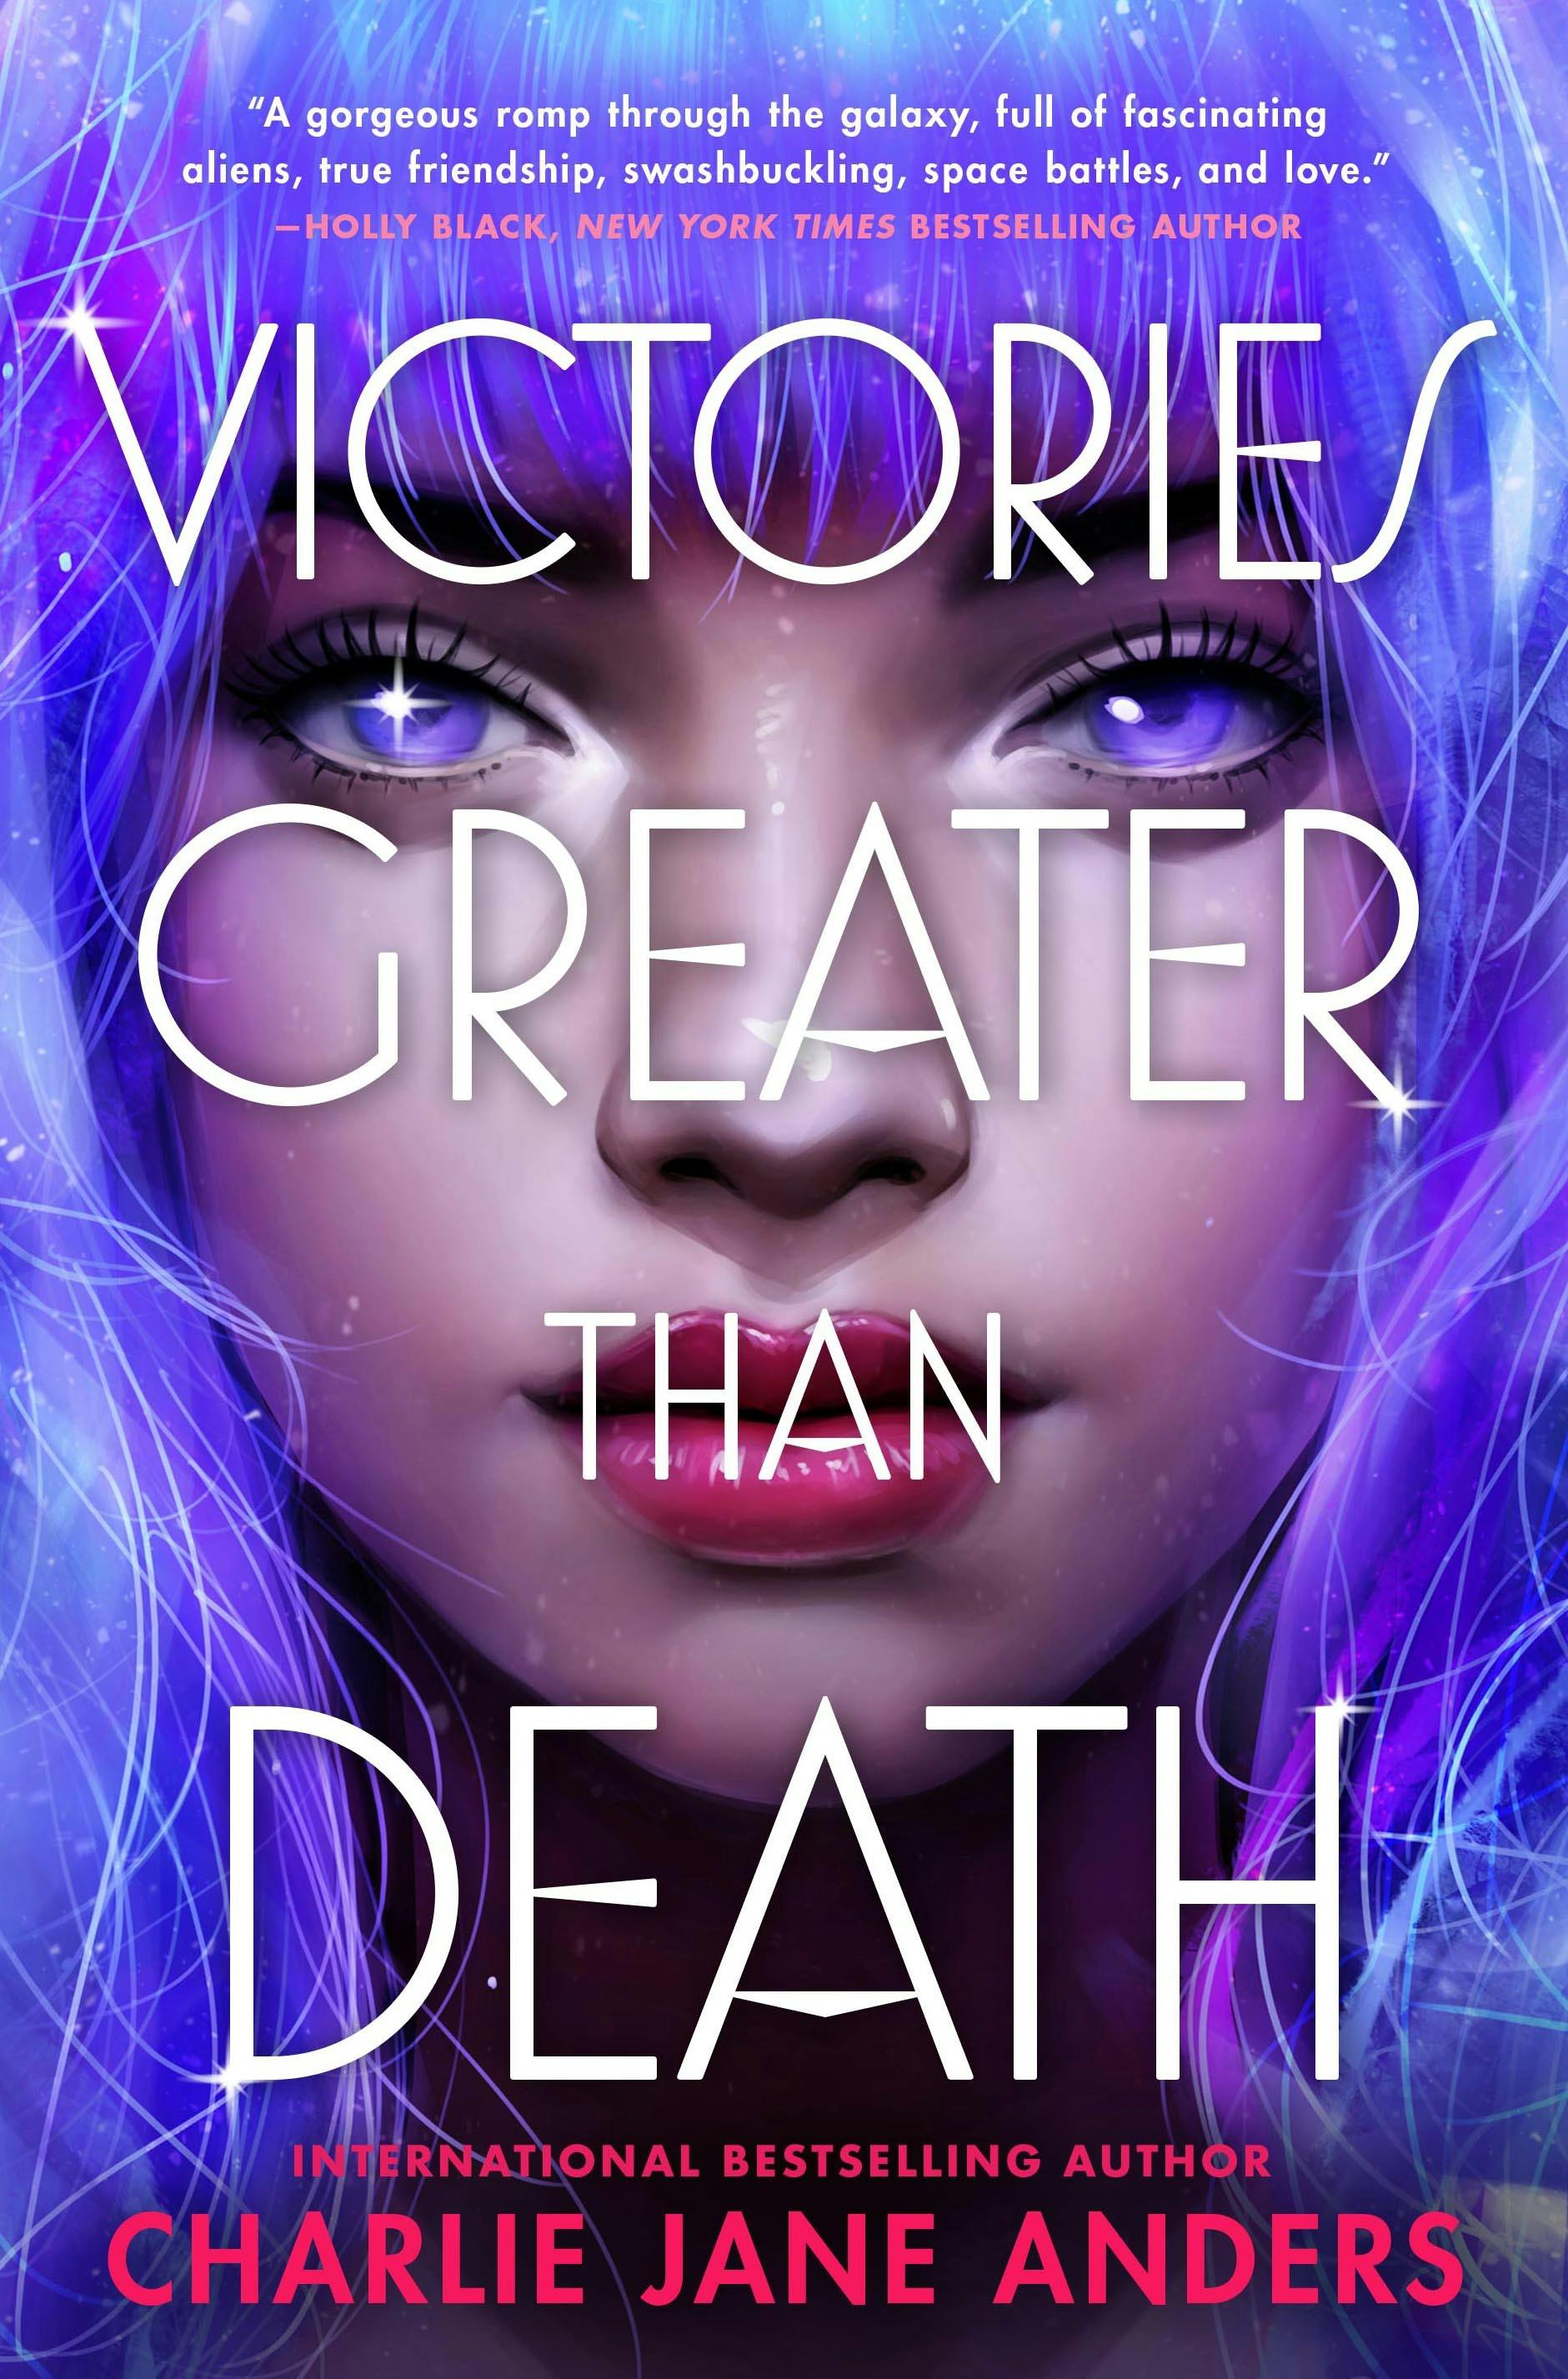 Cover for the book titled as: Victories Greater Than Death